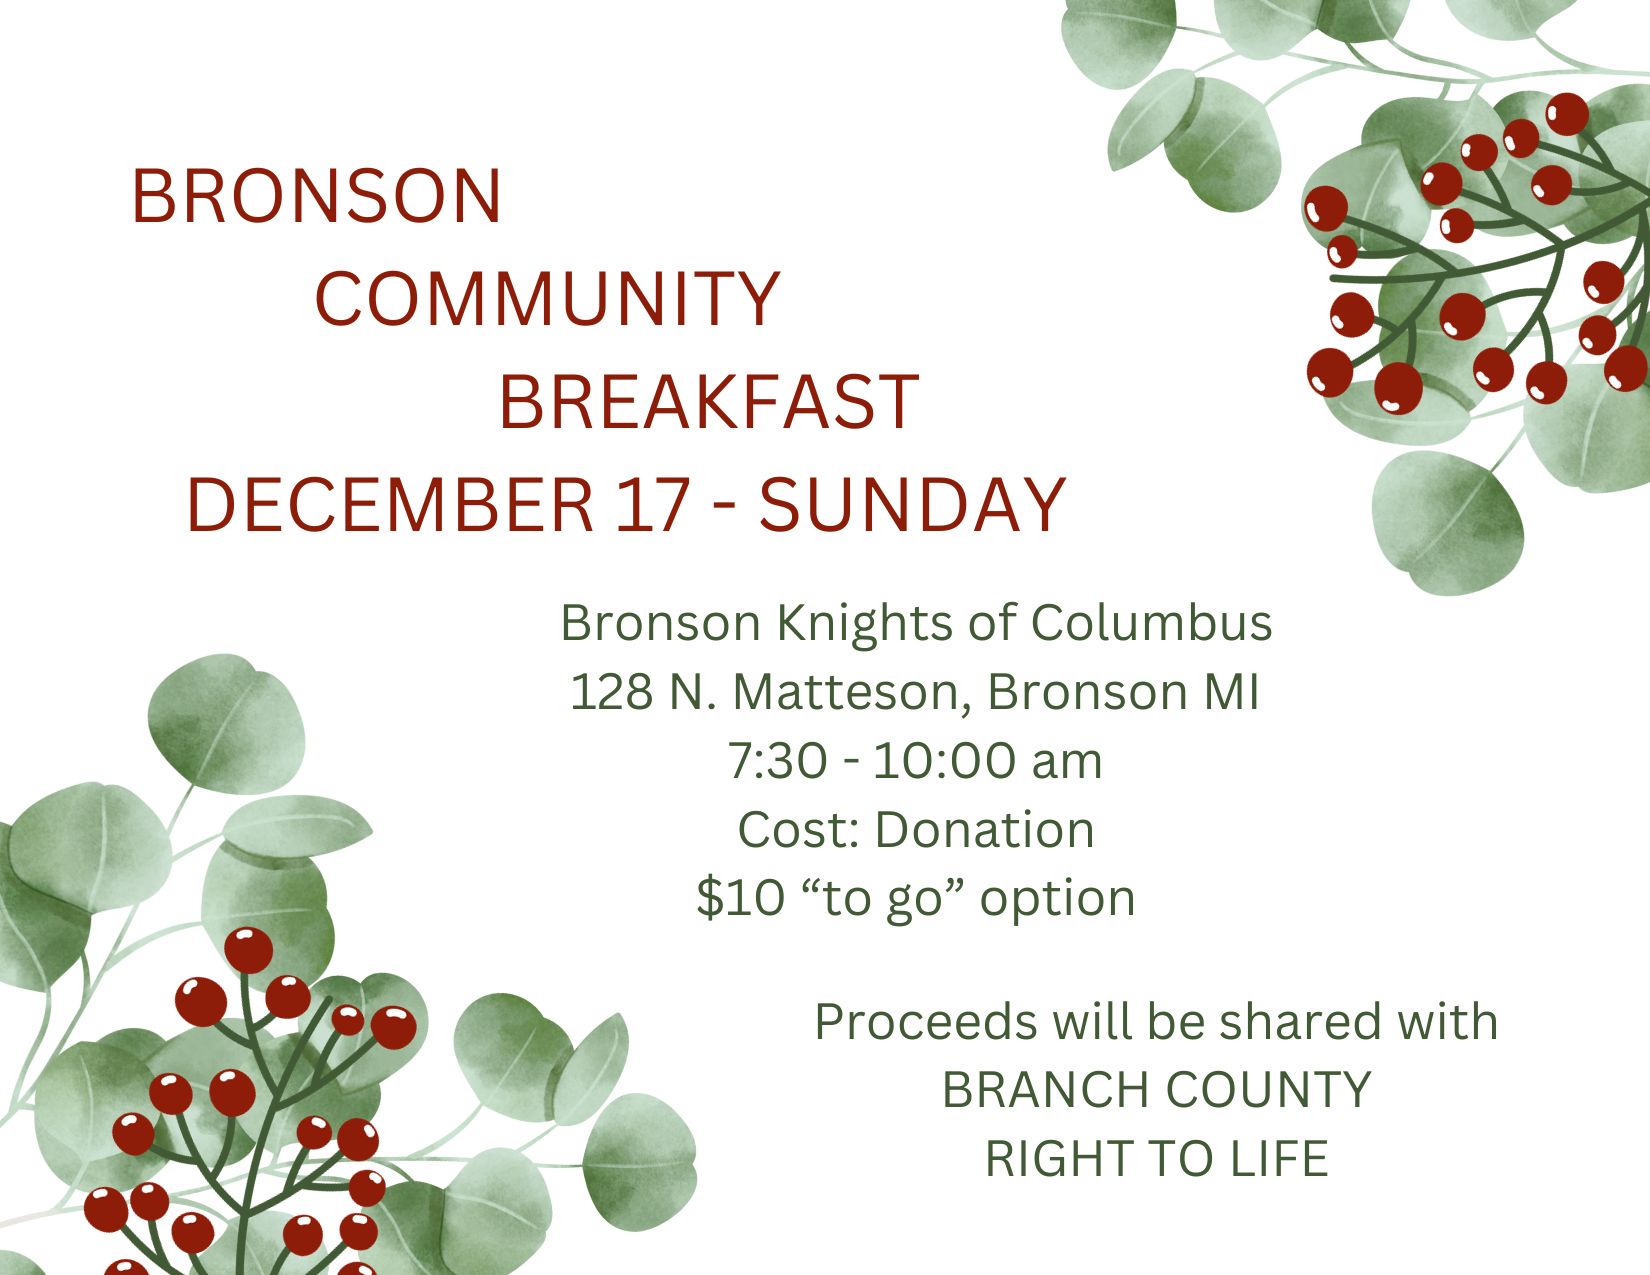 Bronson Community Breakfast on Sunday, December 17, 2023 from 7:30 a.m. to 10:00 a.m.
See post for details.